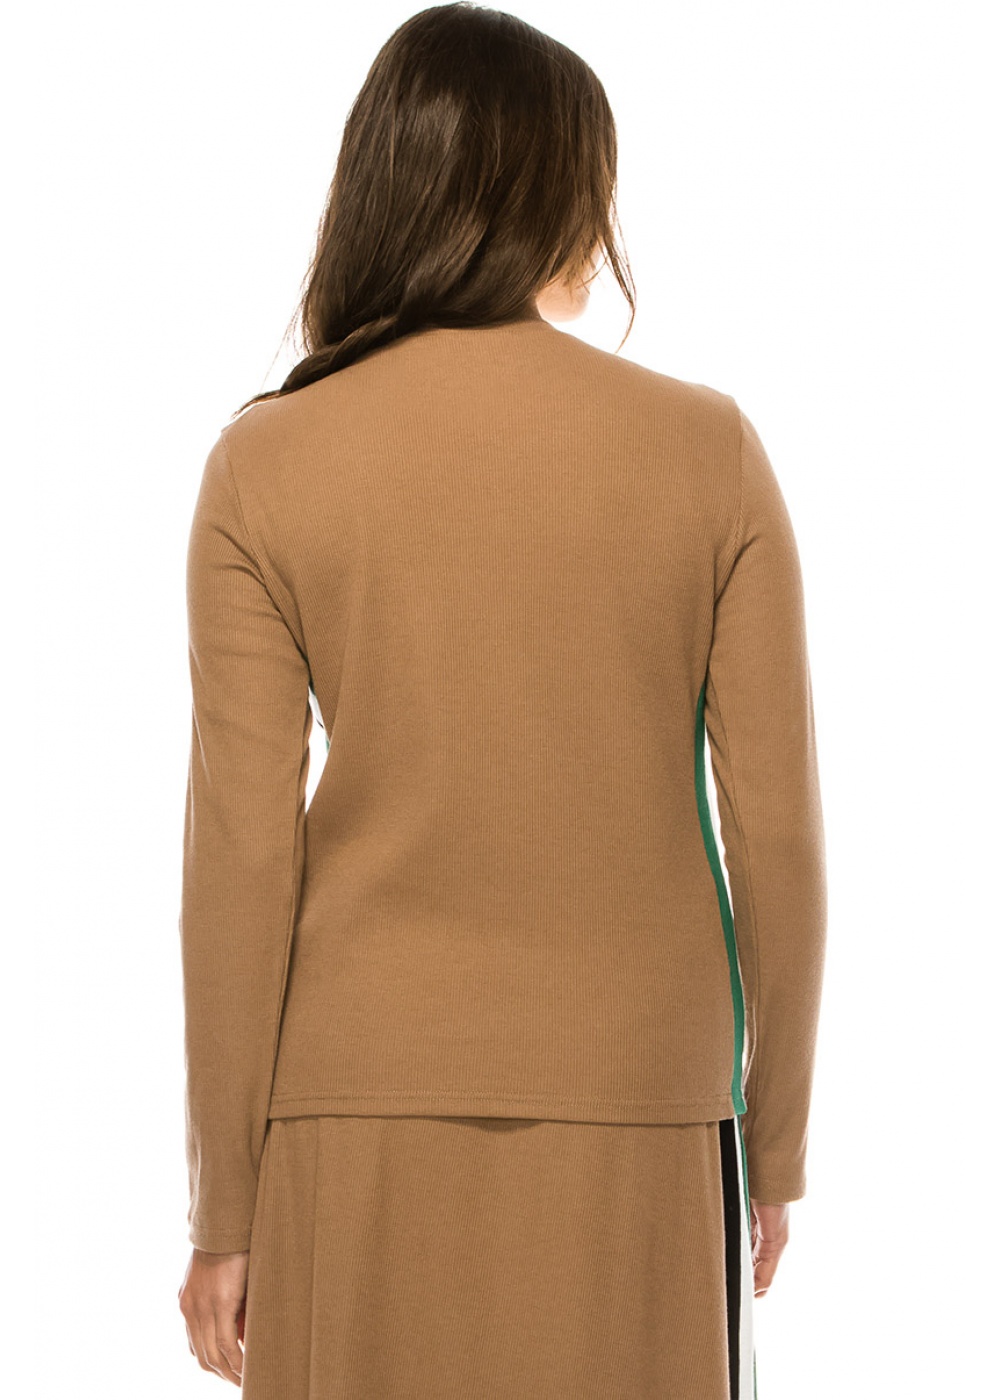 Camel Long Sleeve T-Shirt With Colorful Side Stripes